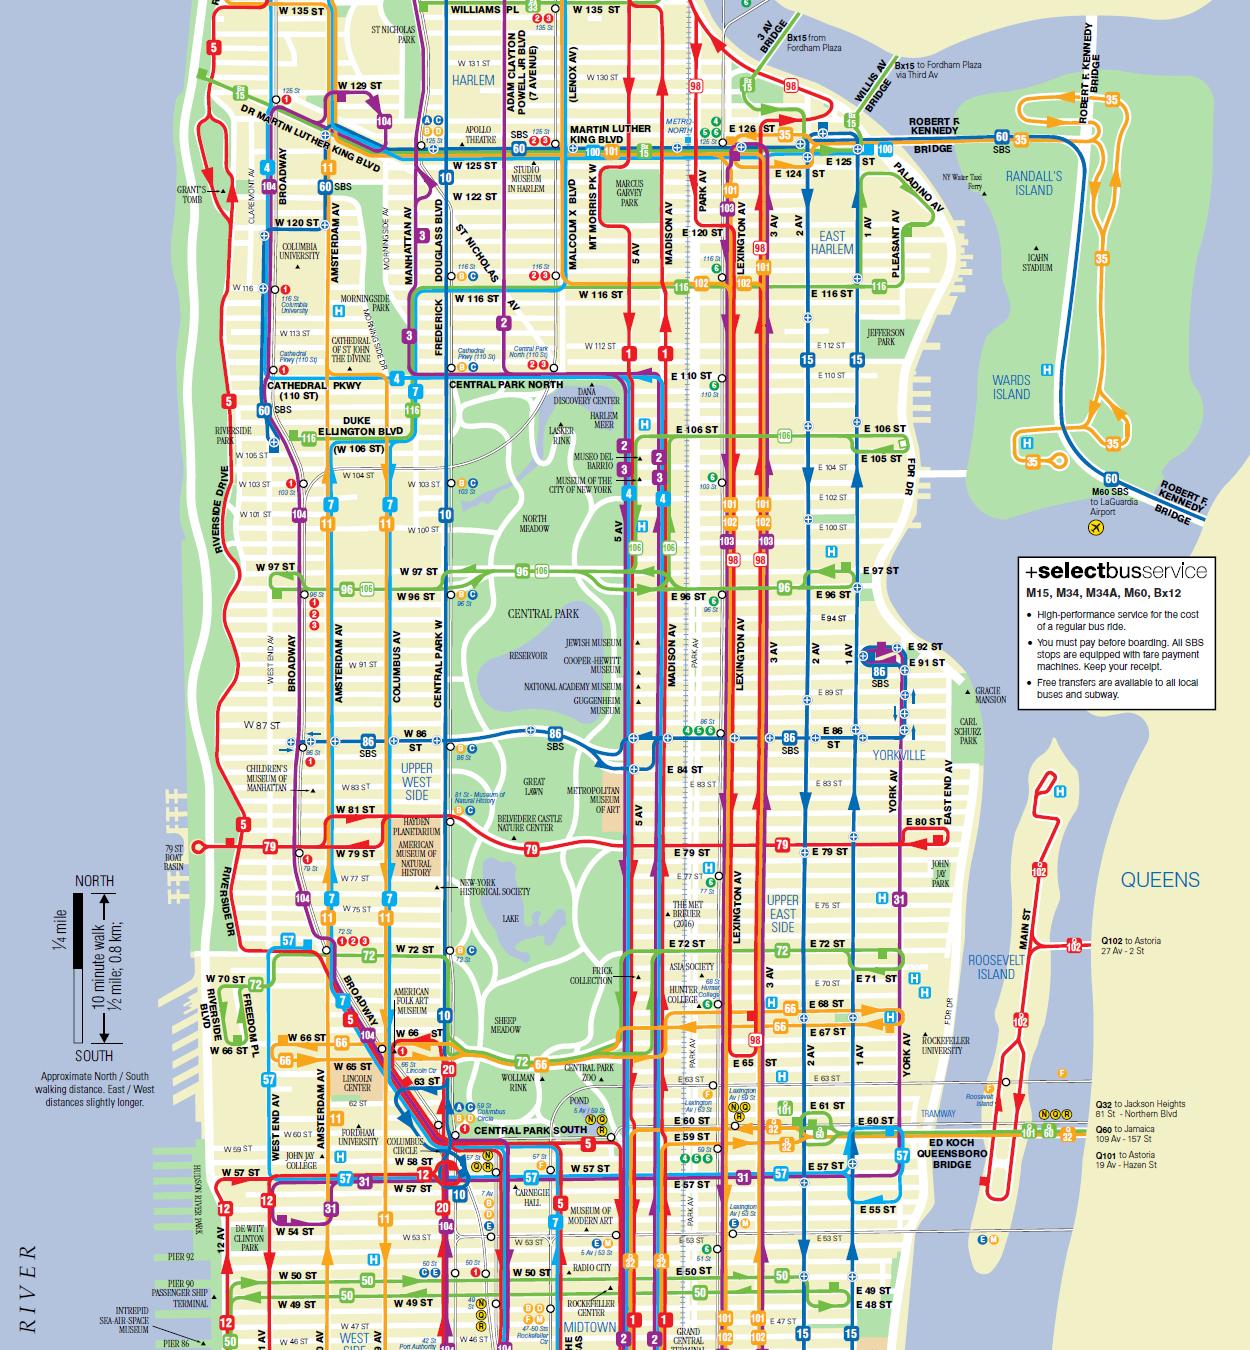 M15 bus map - Map of m15 bus (New York - USA)